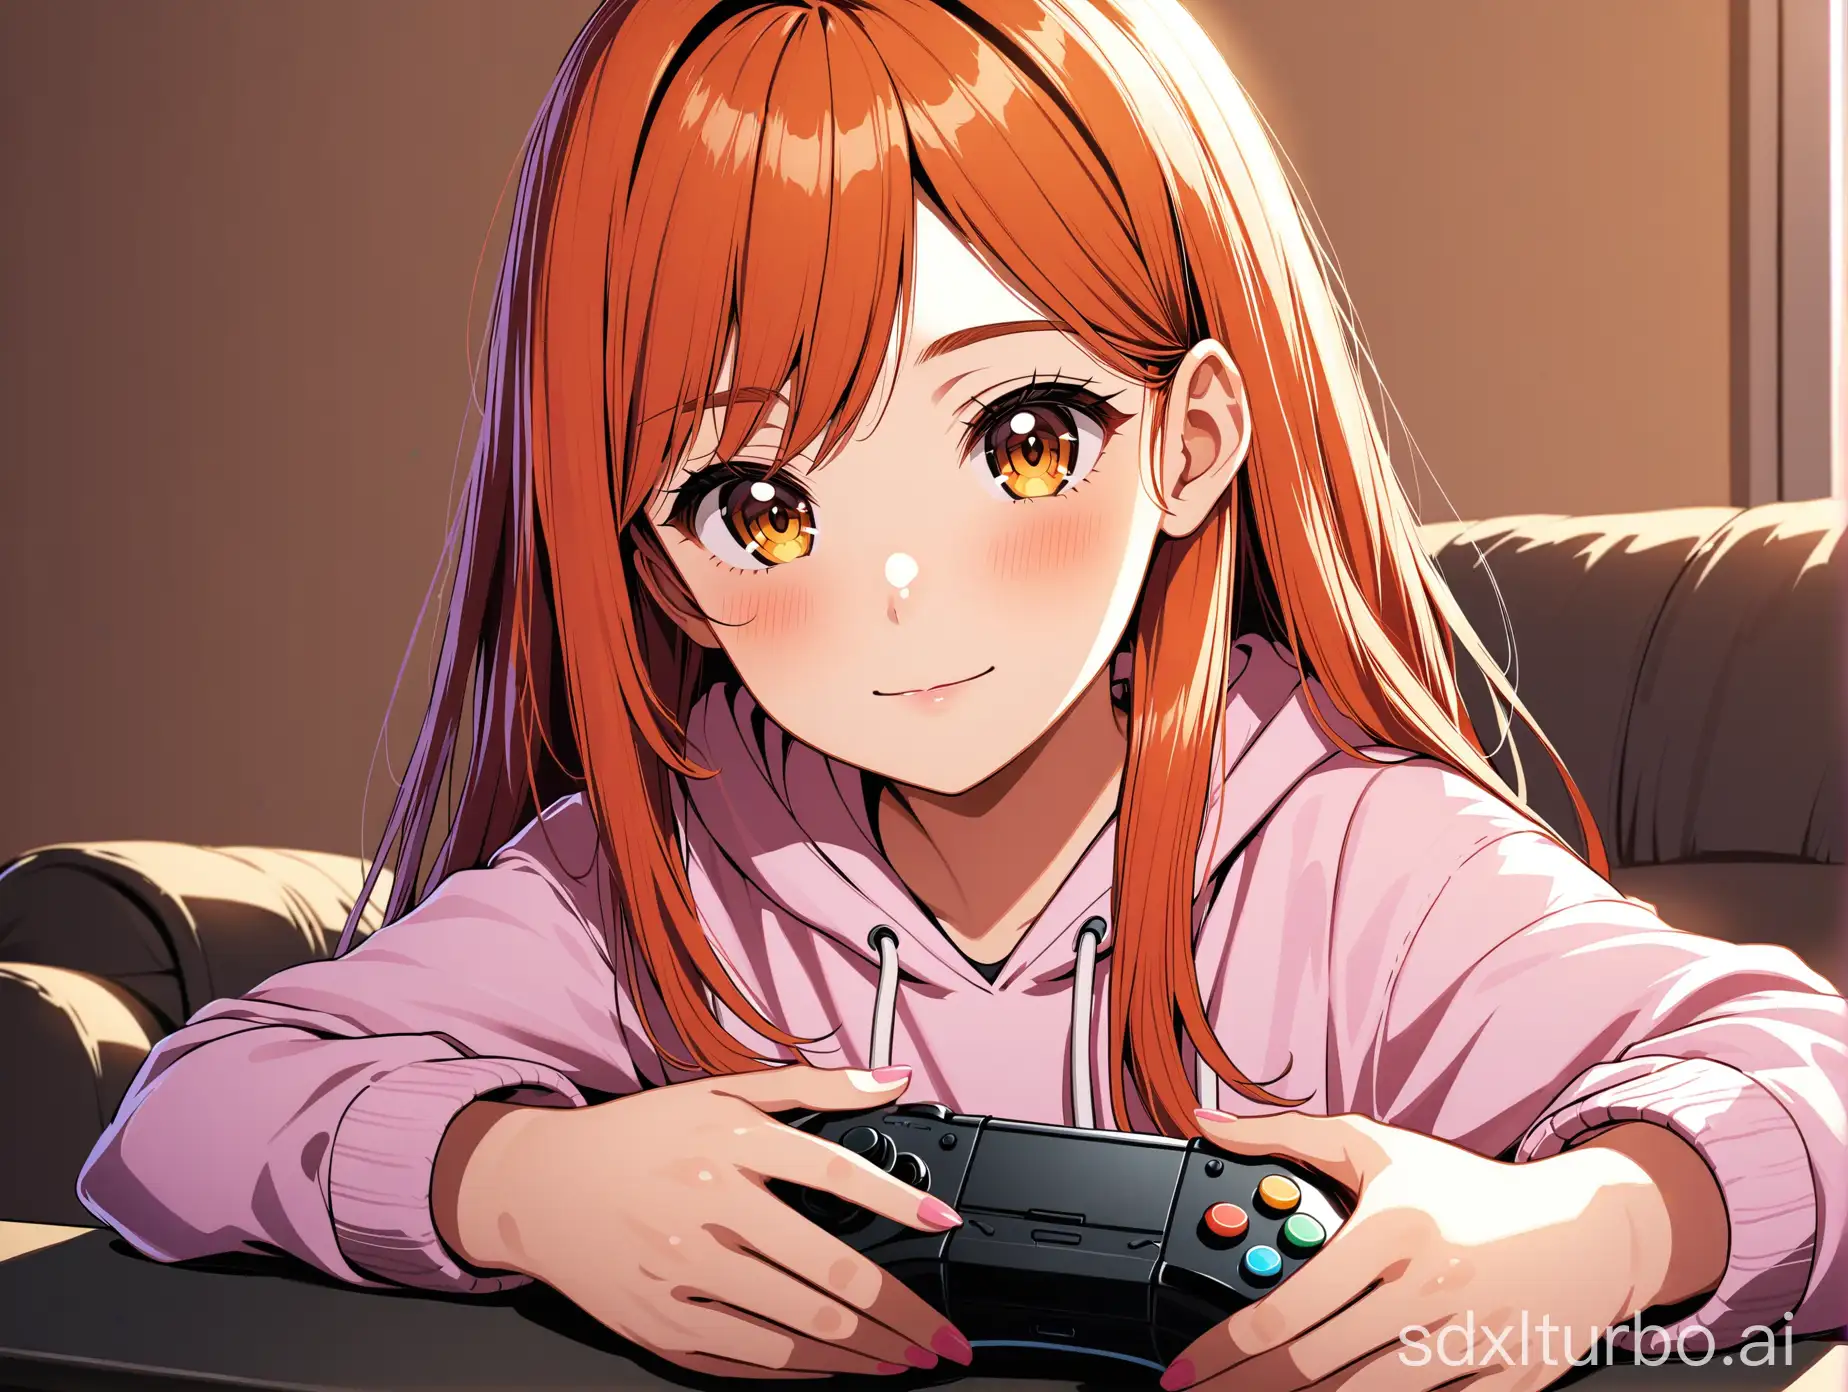 The girl who plays console games